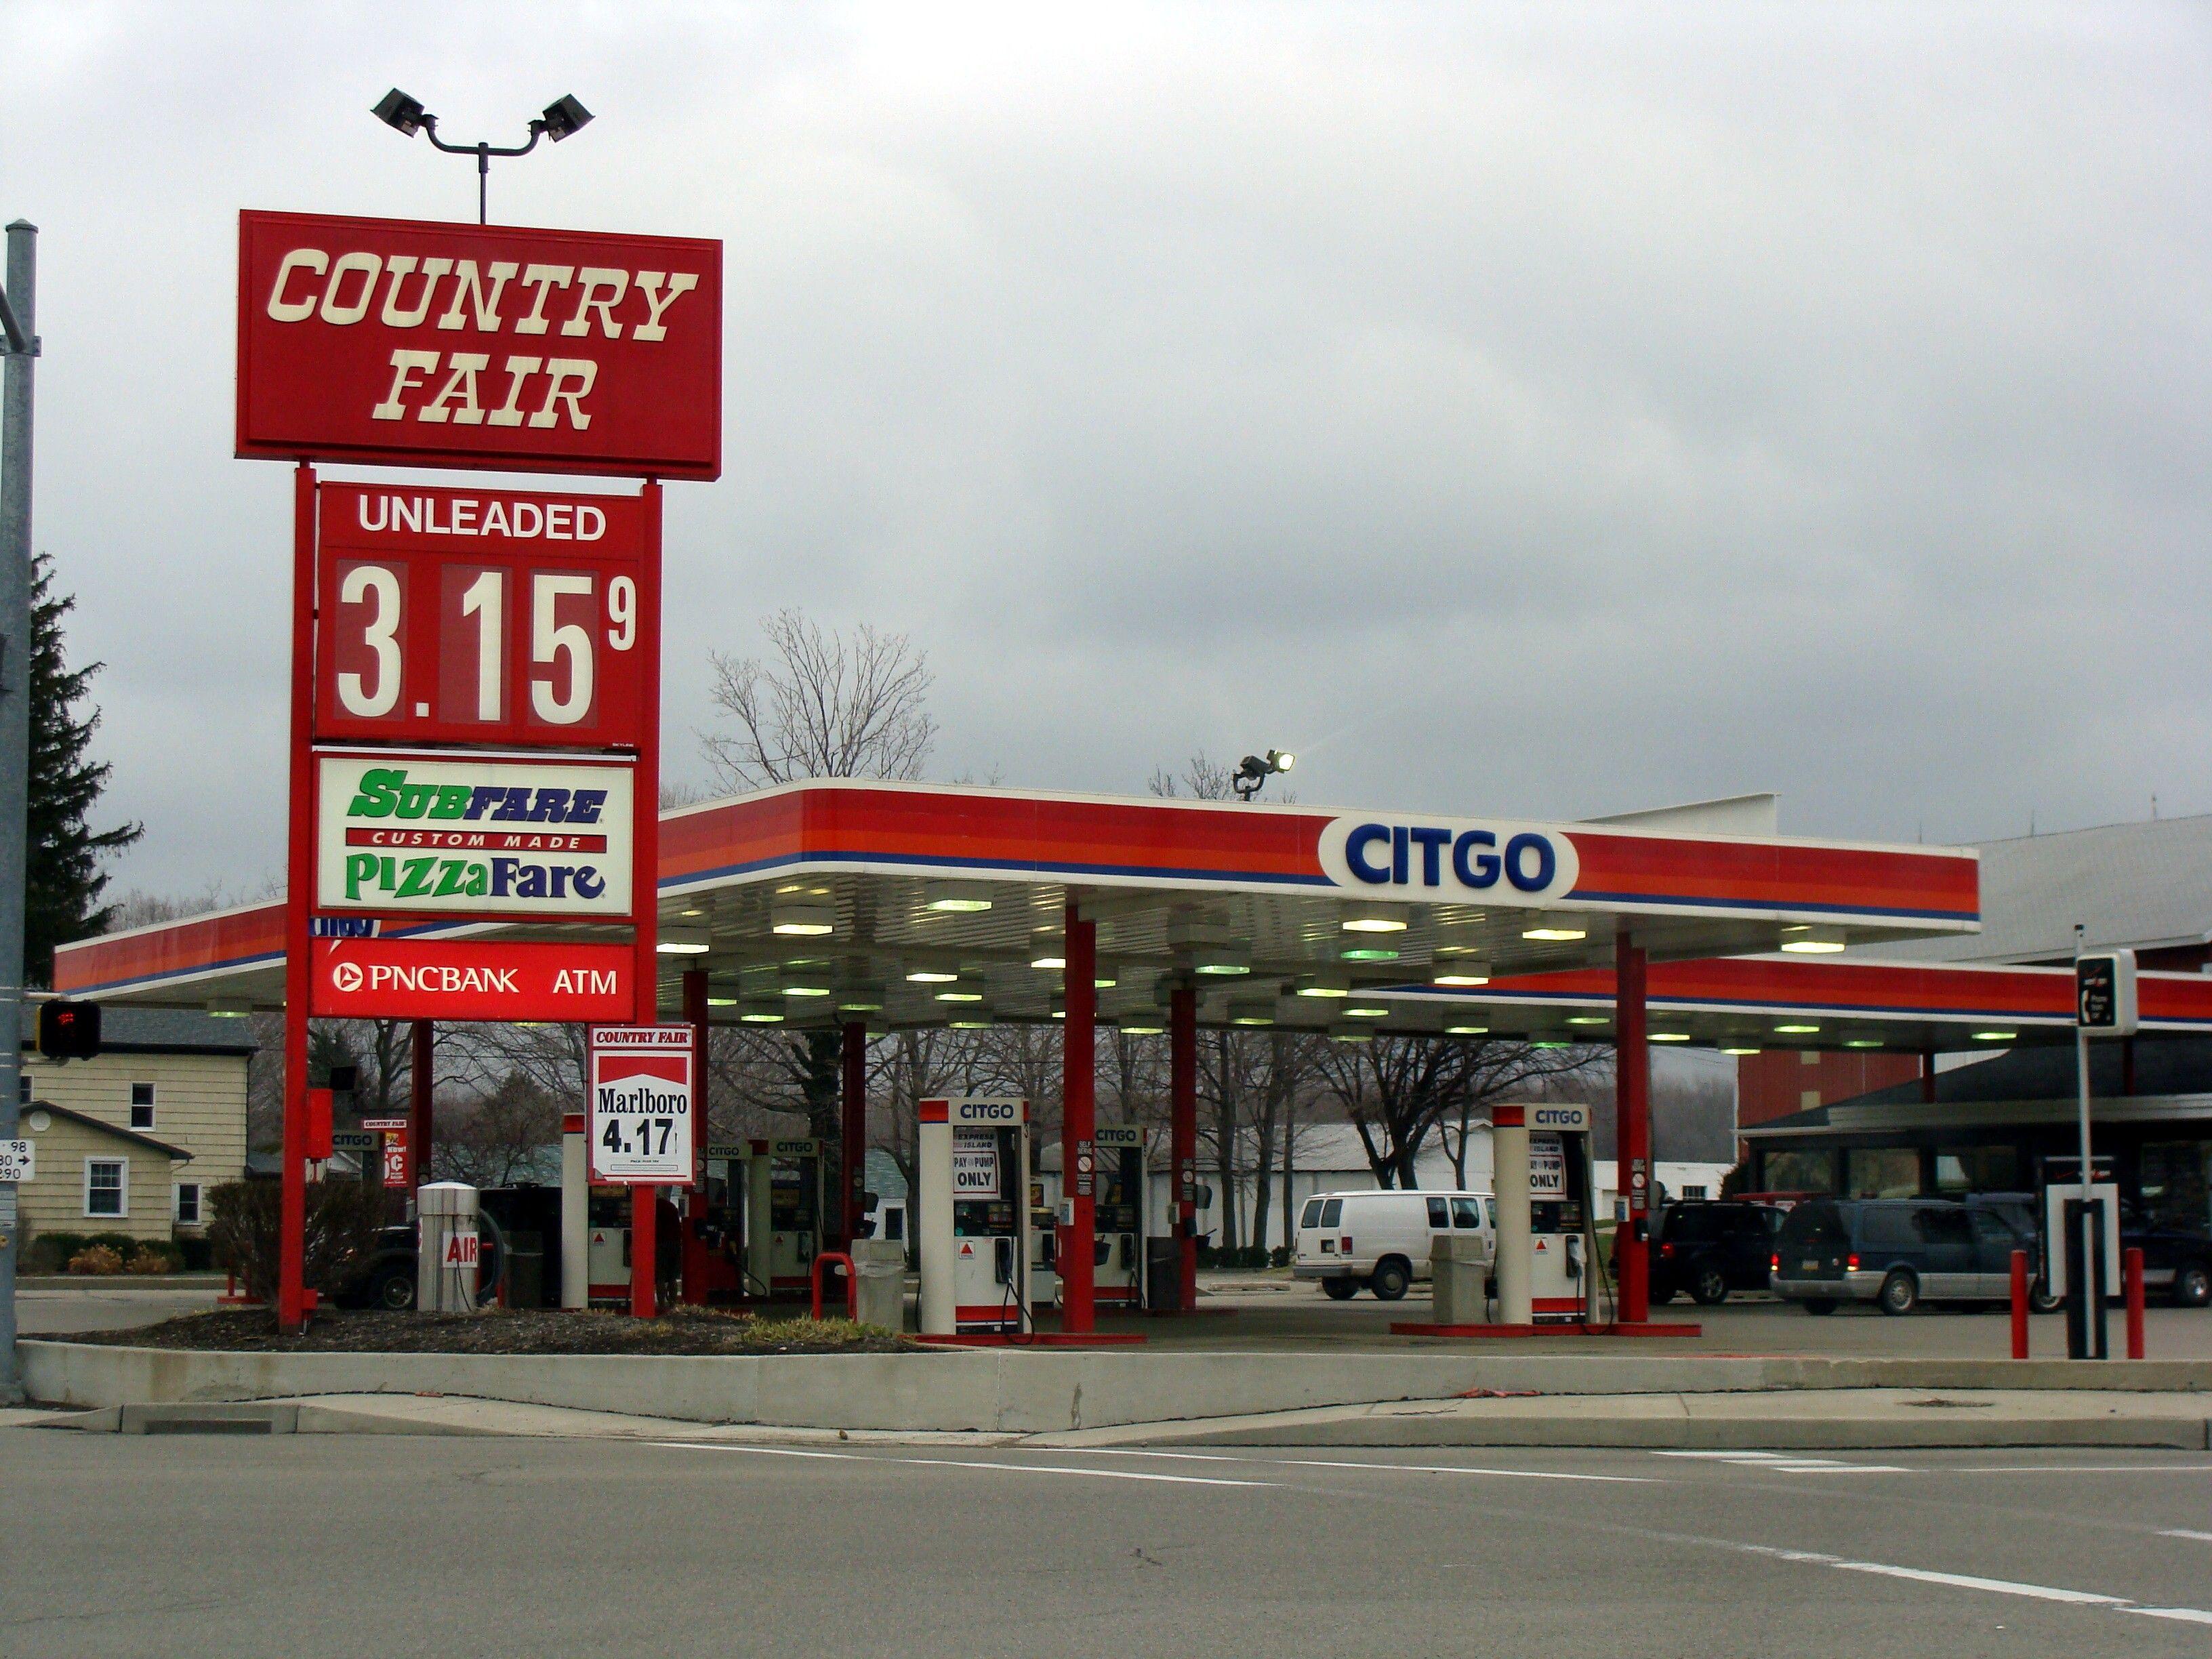 Red Gas Station Logo - File:Country Fair gas station.jpg - Wikimedia Commons